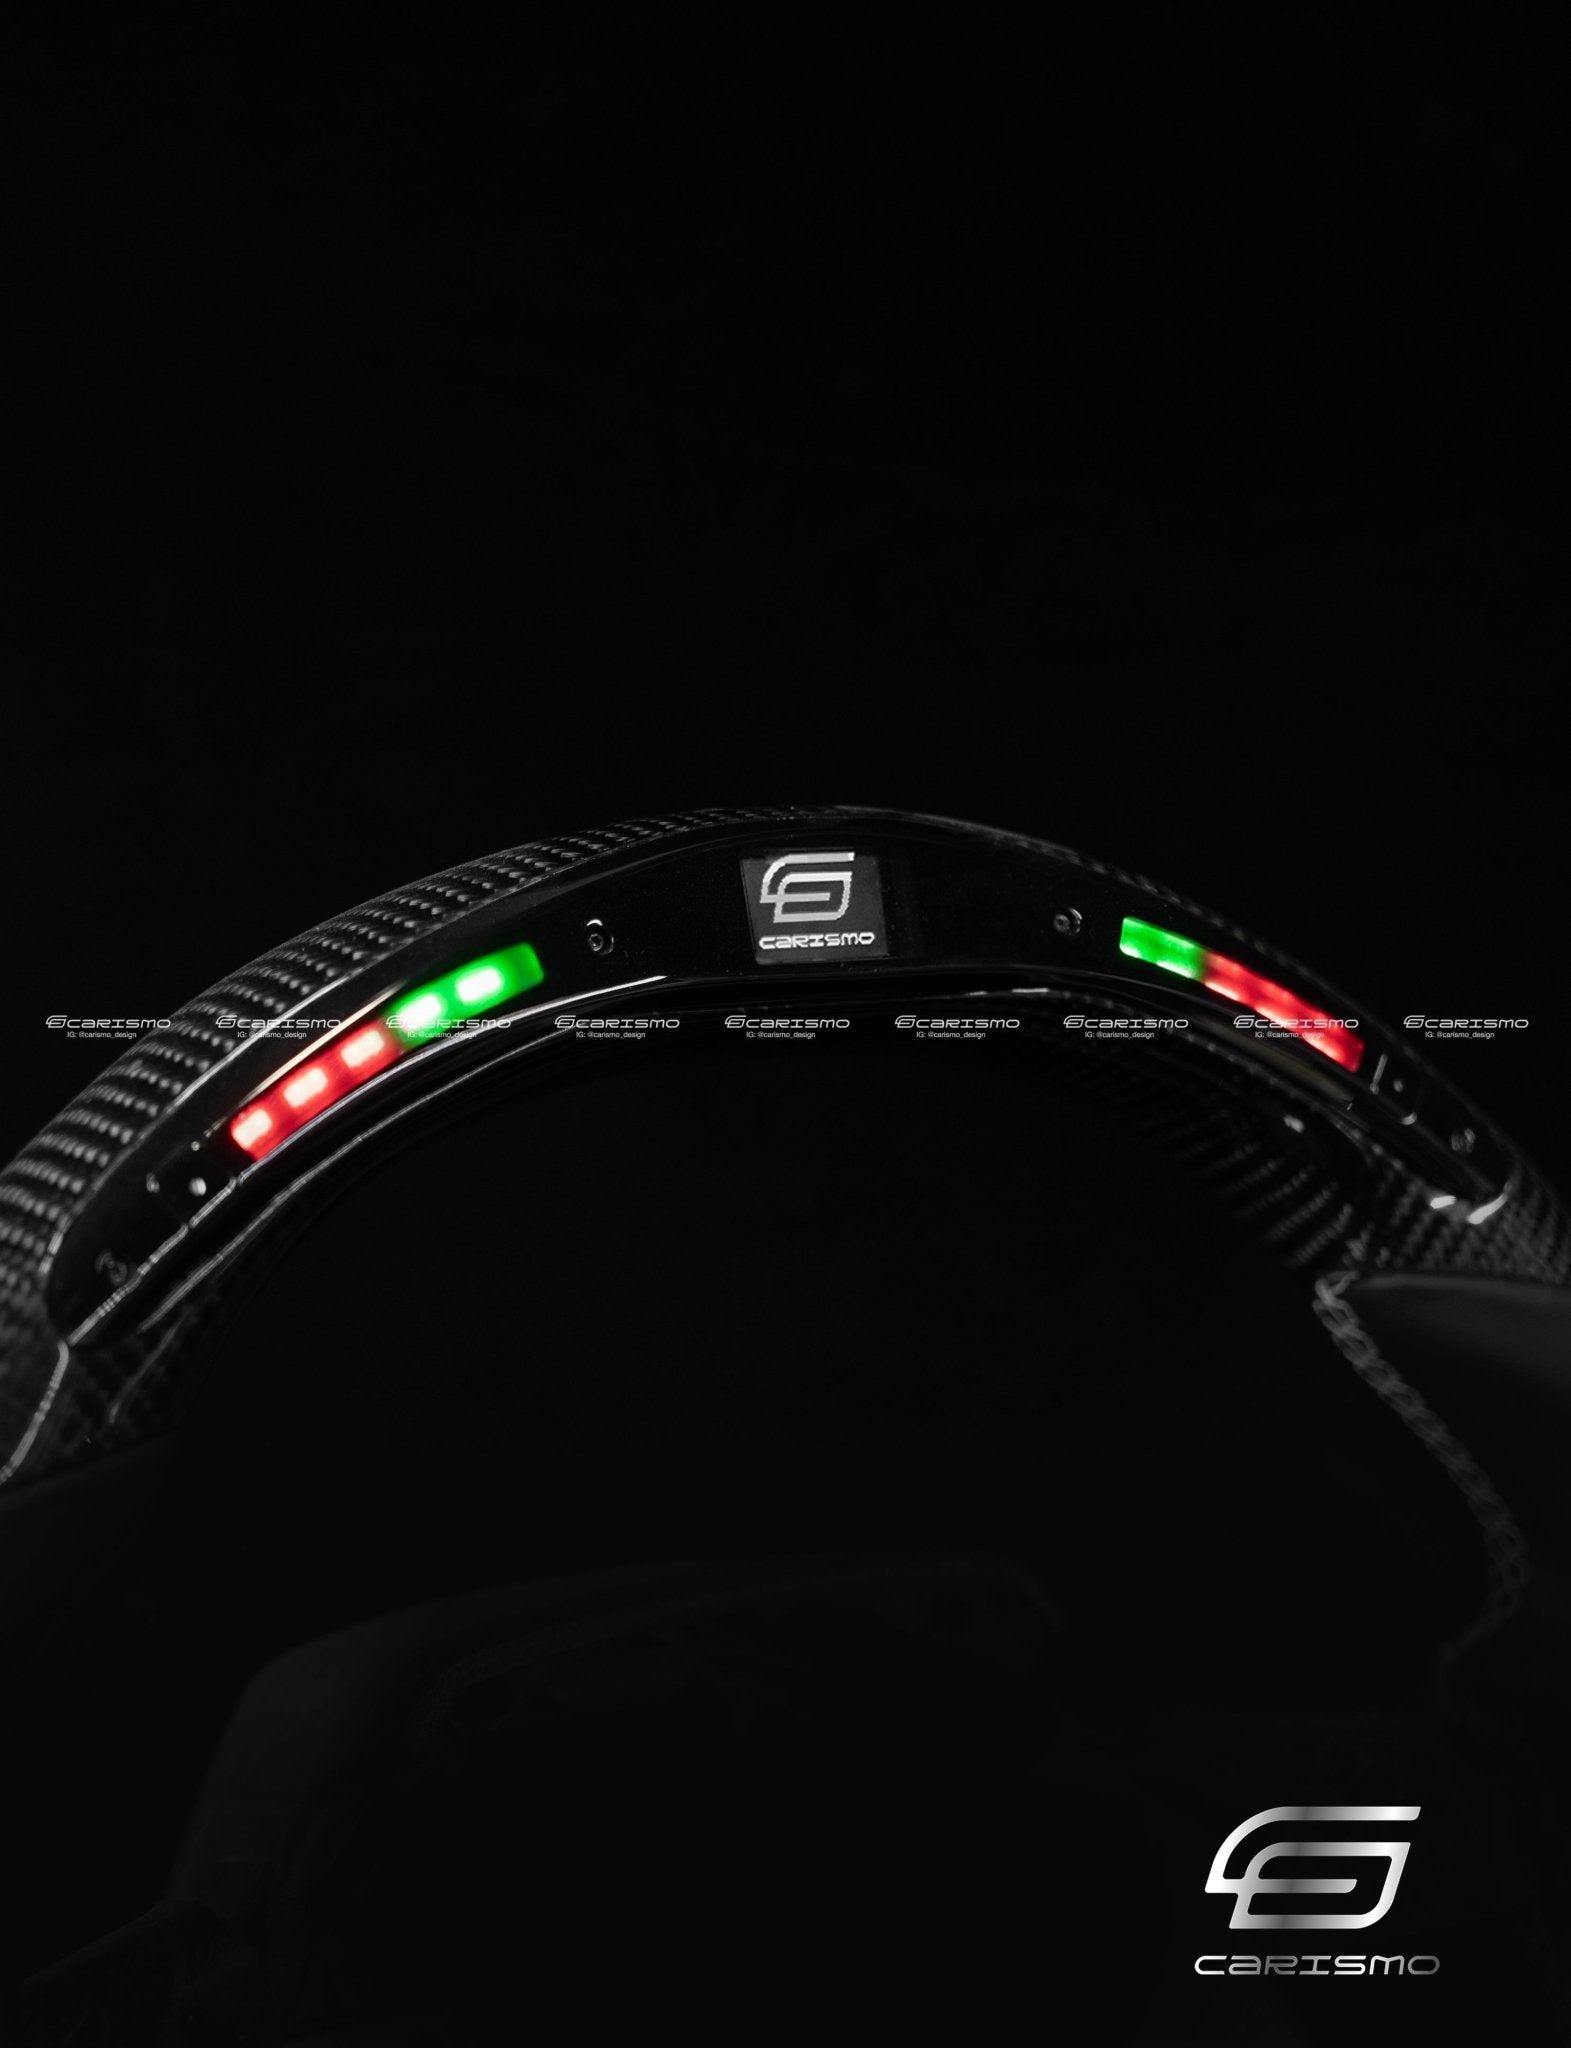 Carismo Steering Wheel For Audi R8 (Gen 2) - Classic RPM LED - Gloss Forged Carbon - Alcantara - Carismo